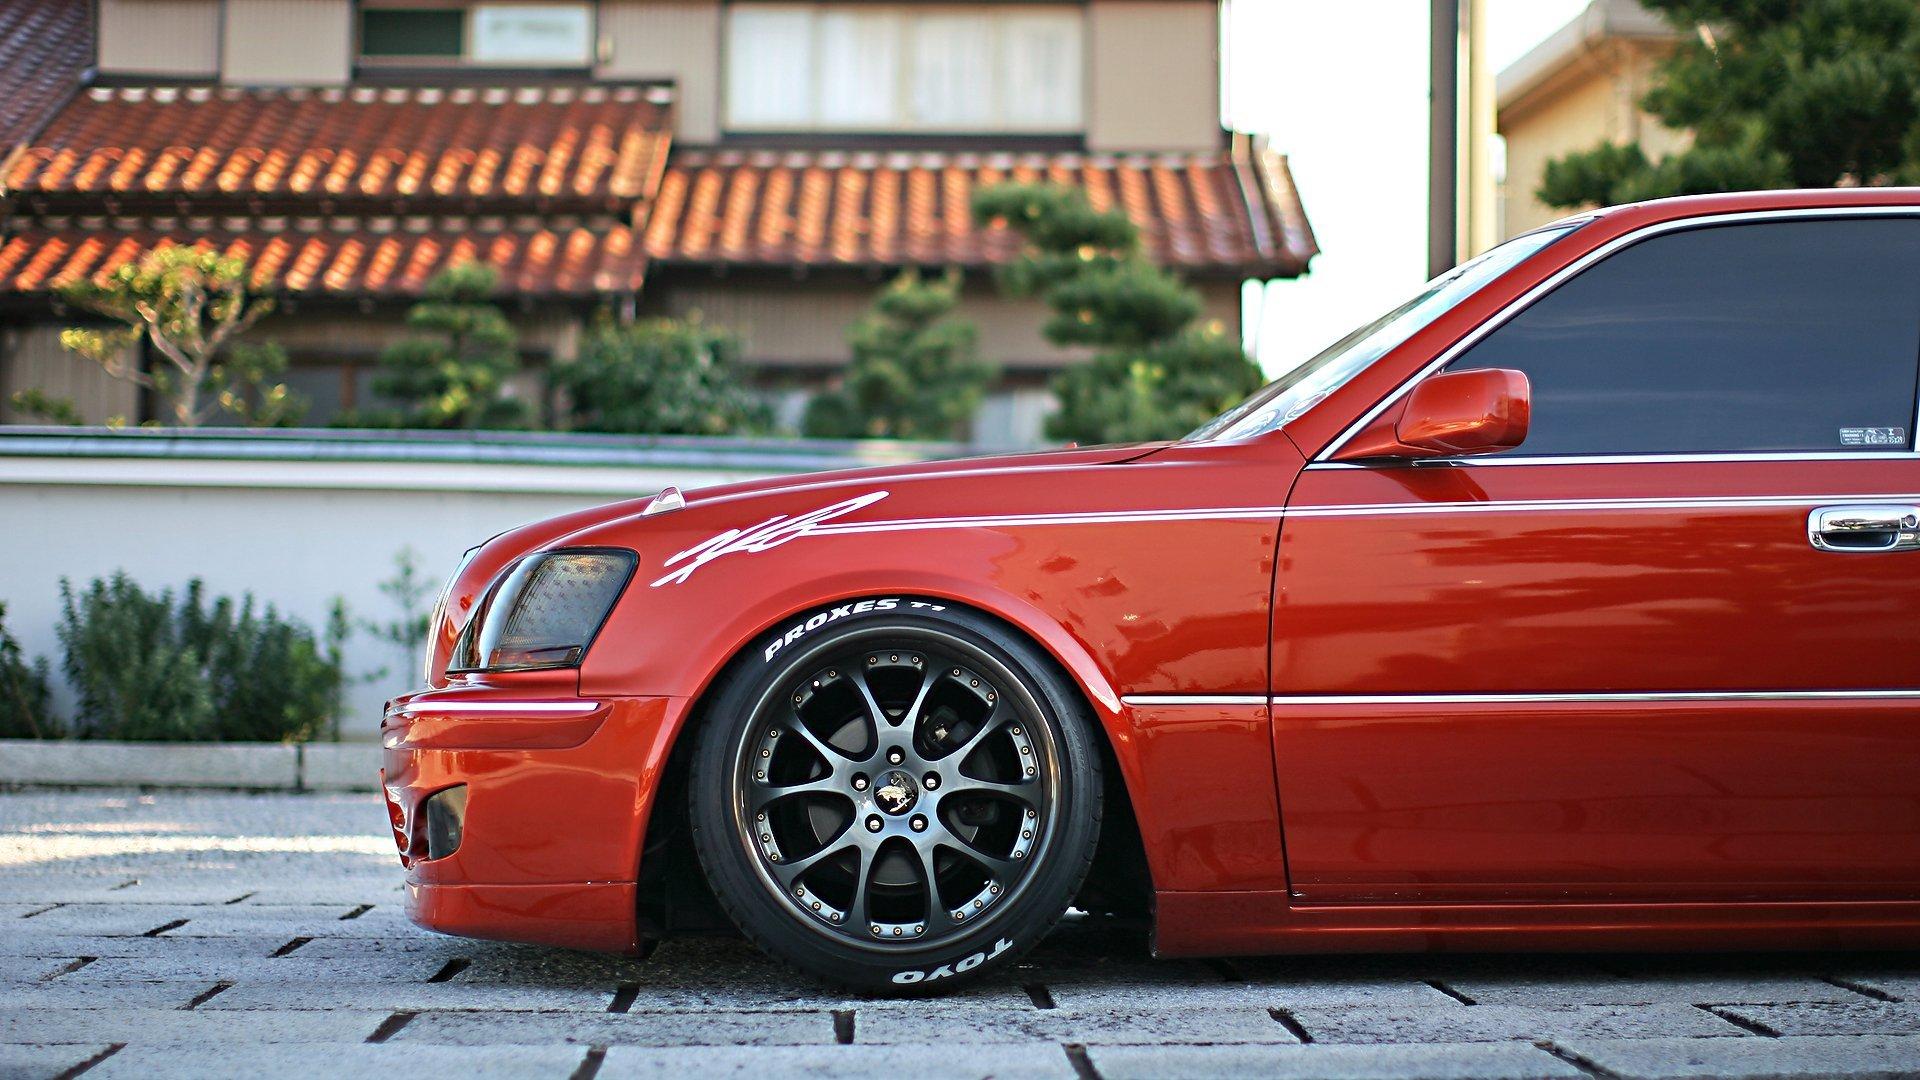 toyota crown majesta tuning japanese vip style wheels rims red HD